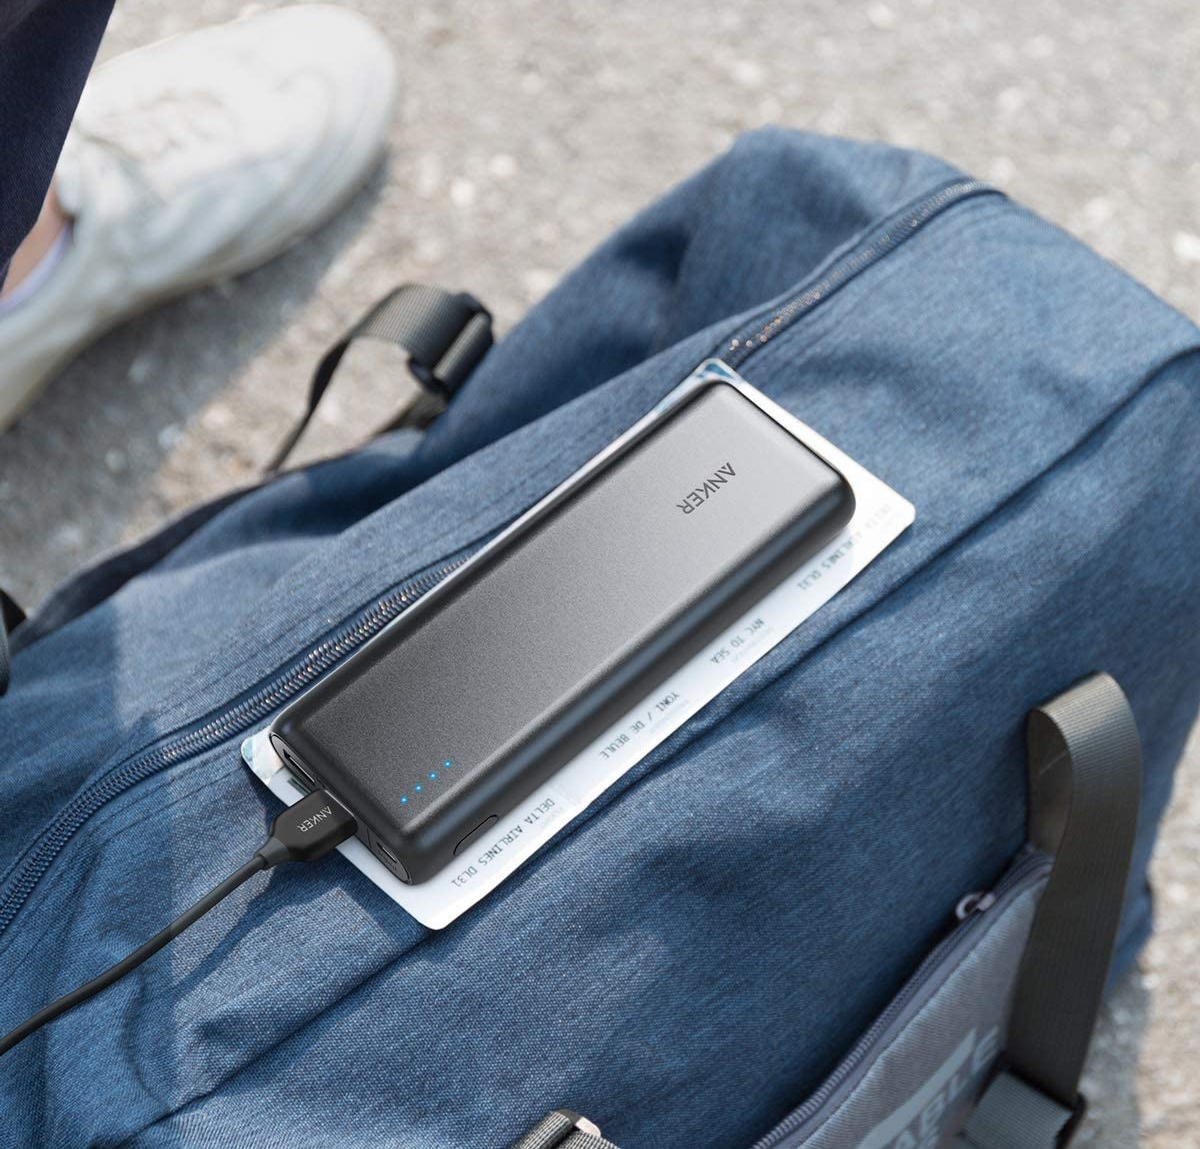 The portable charger on top of a carry-on bag